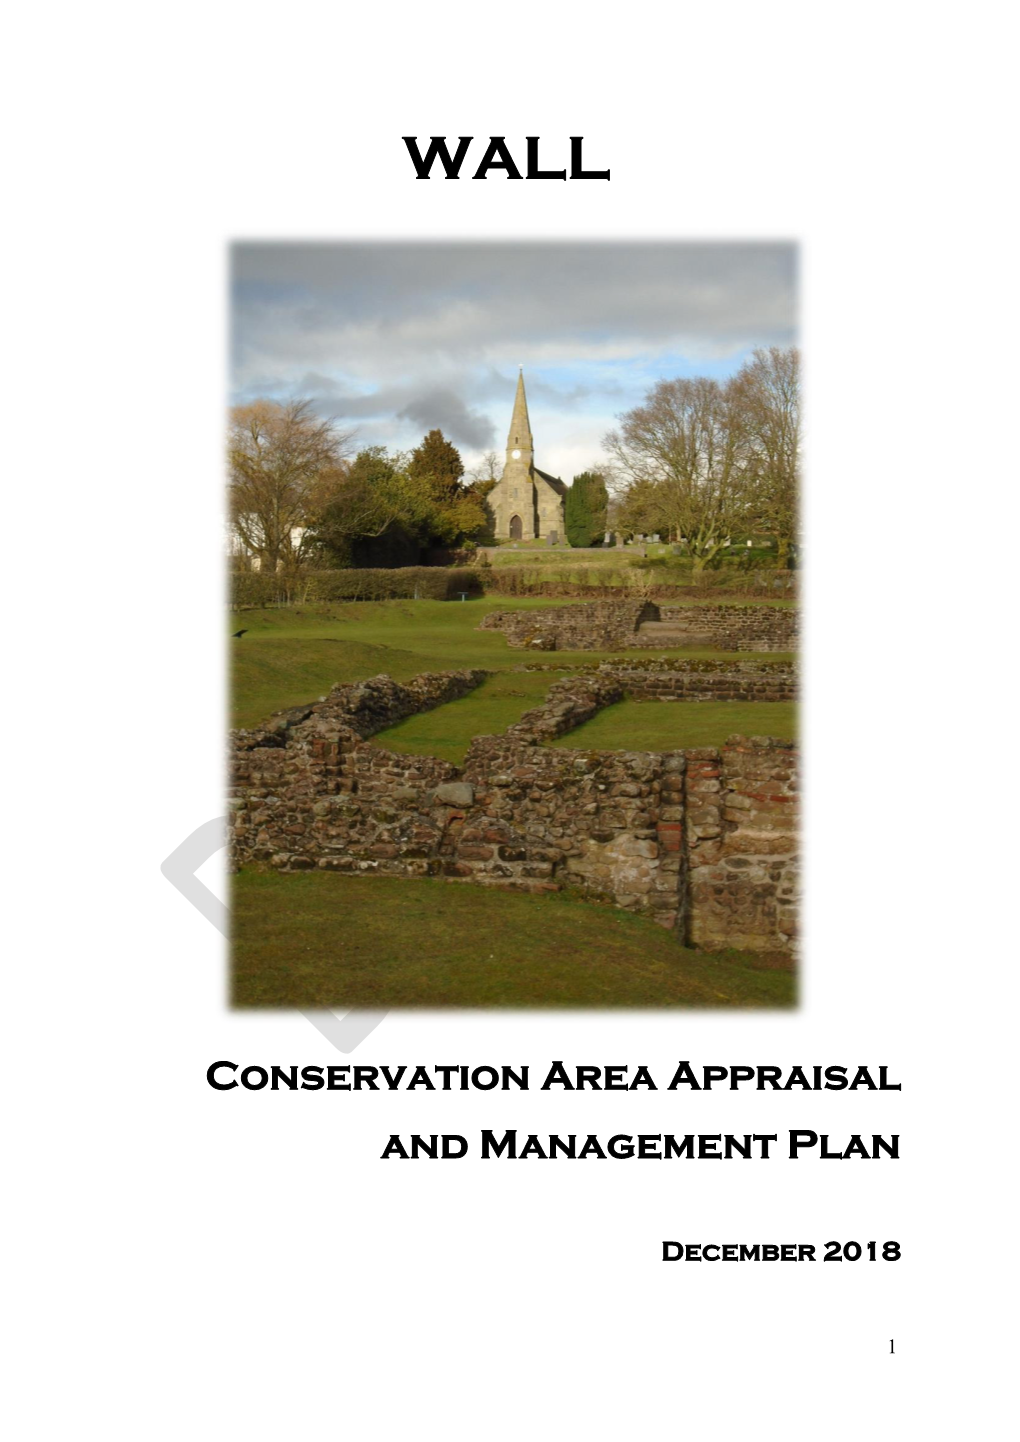 Wall Conservation Area Appraisal and Management Plan